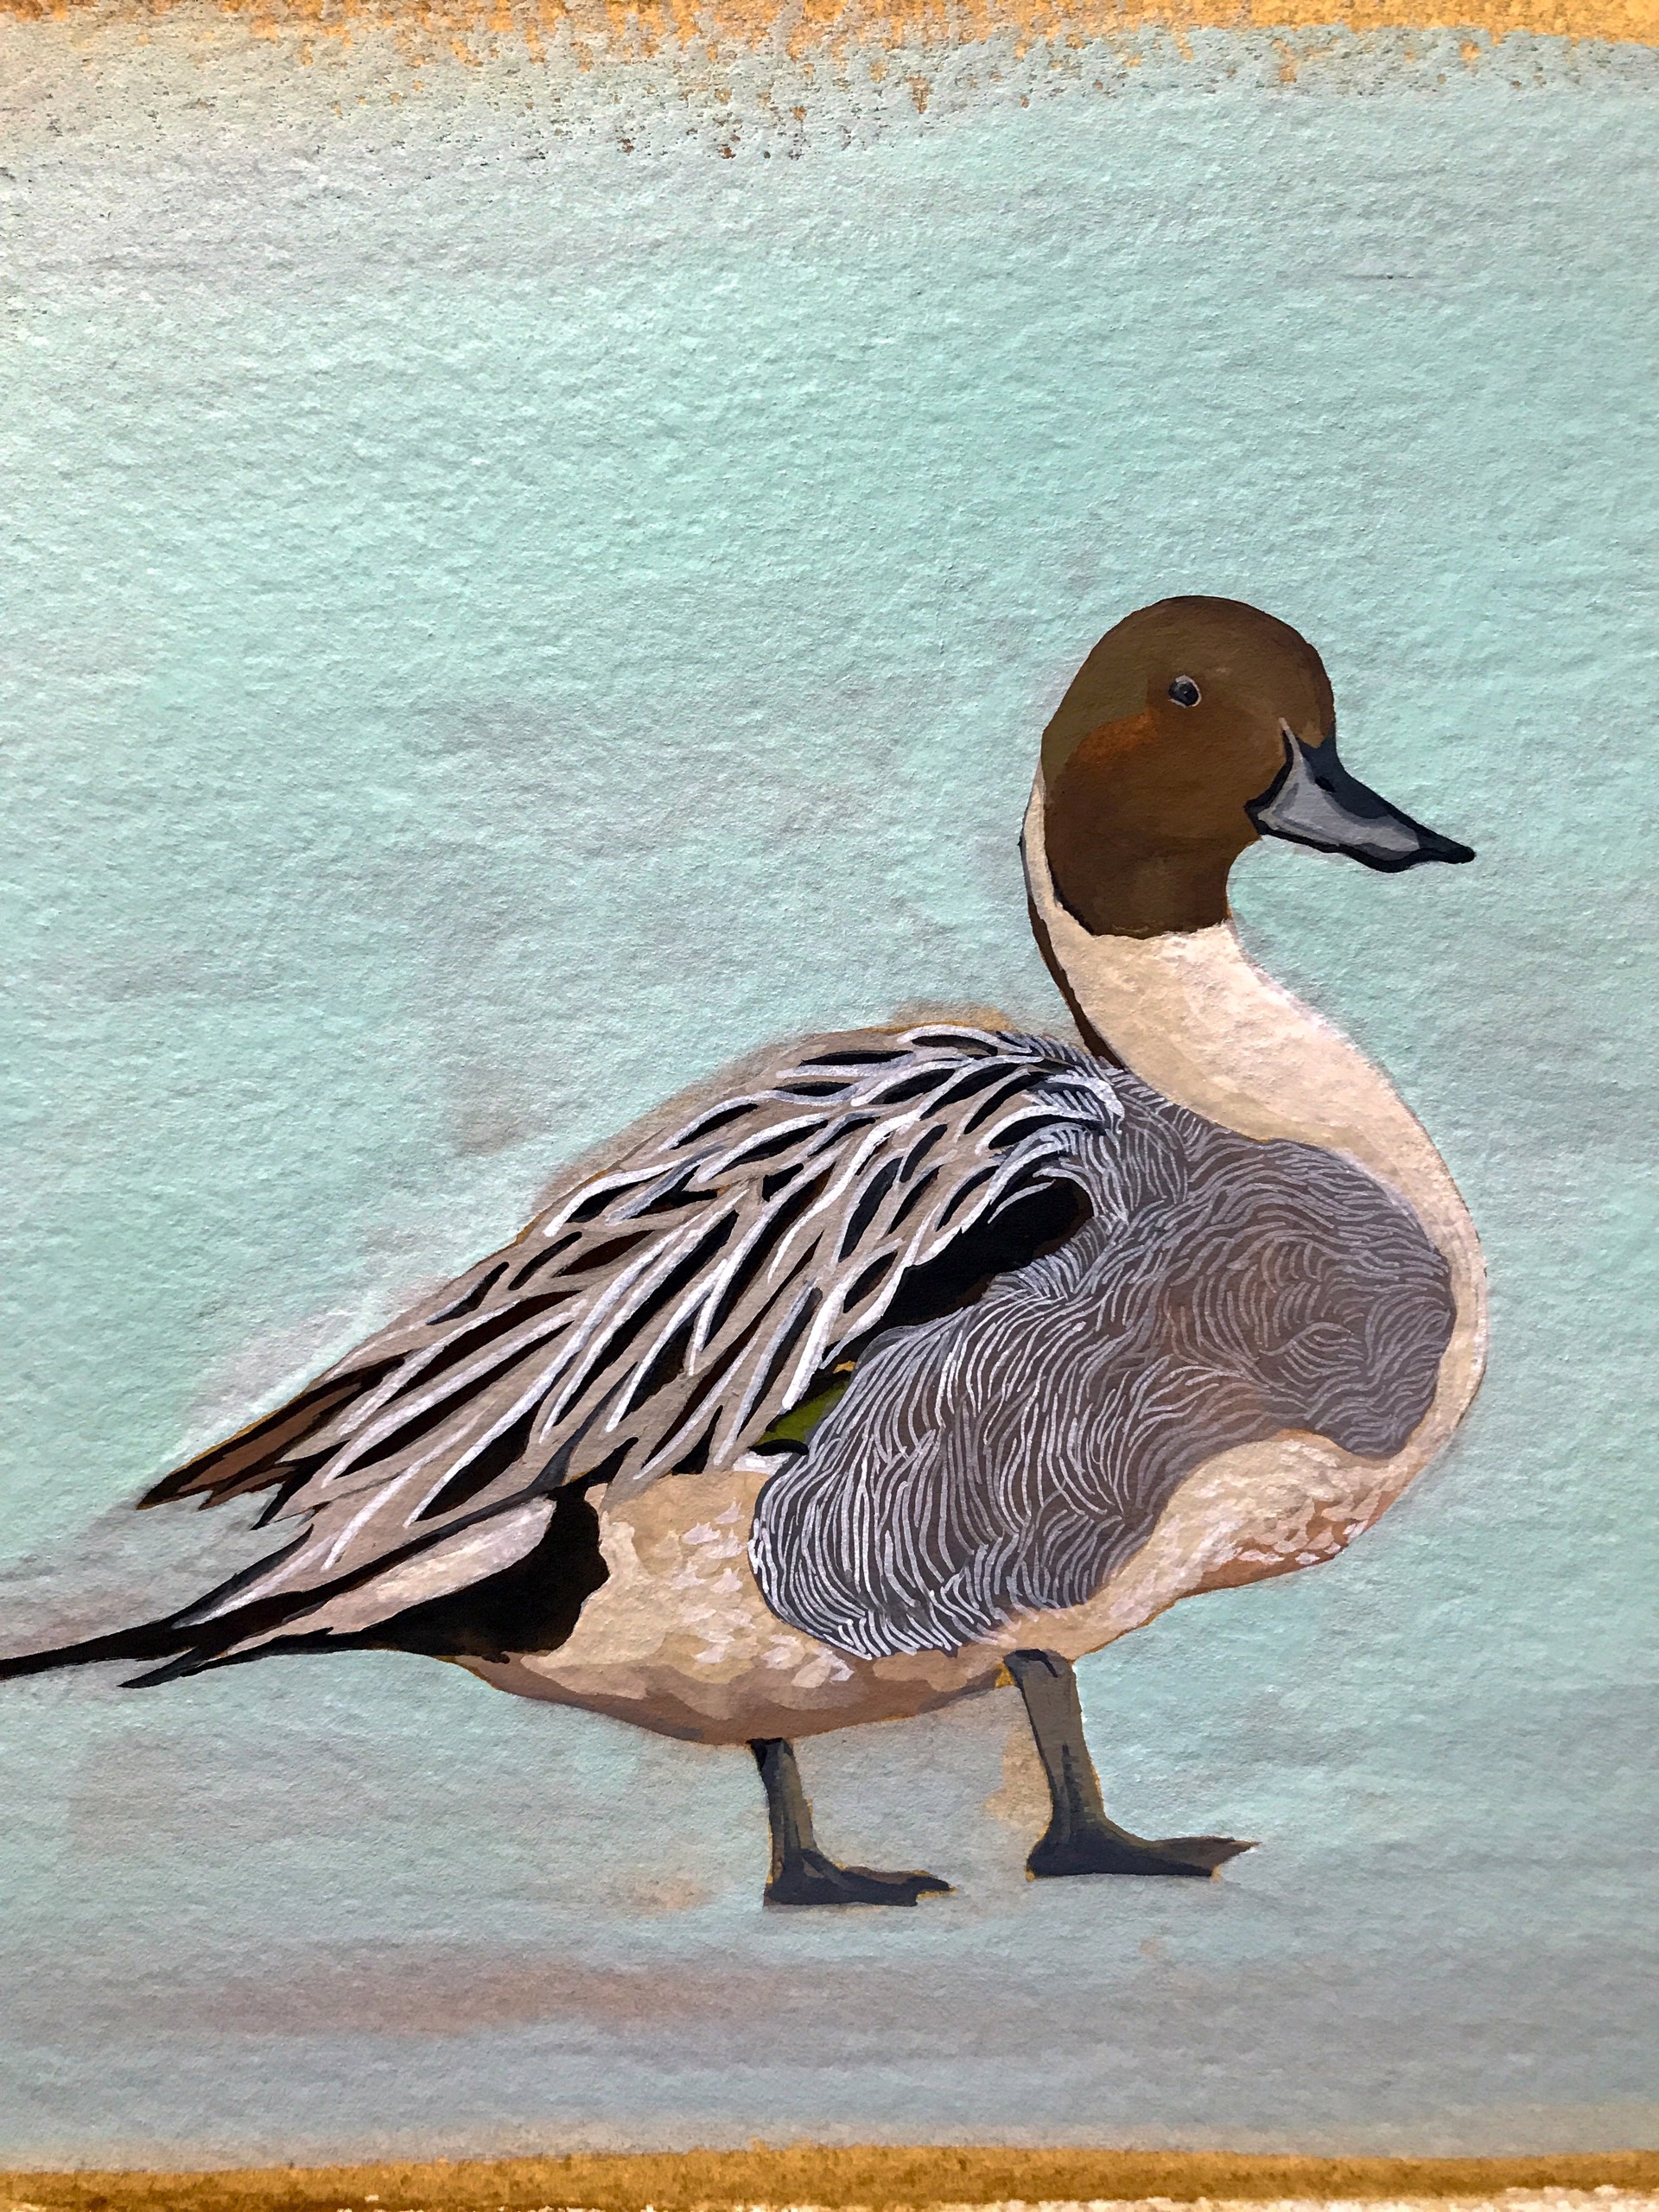 Northern Pintail by Noelle Holler